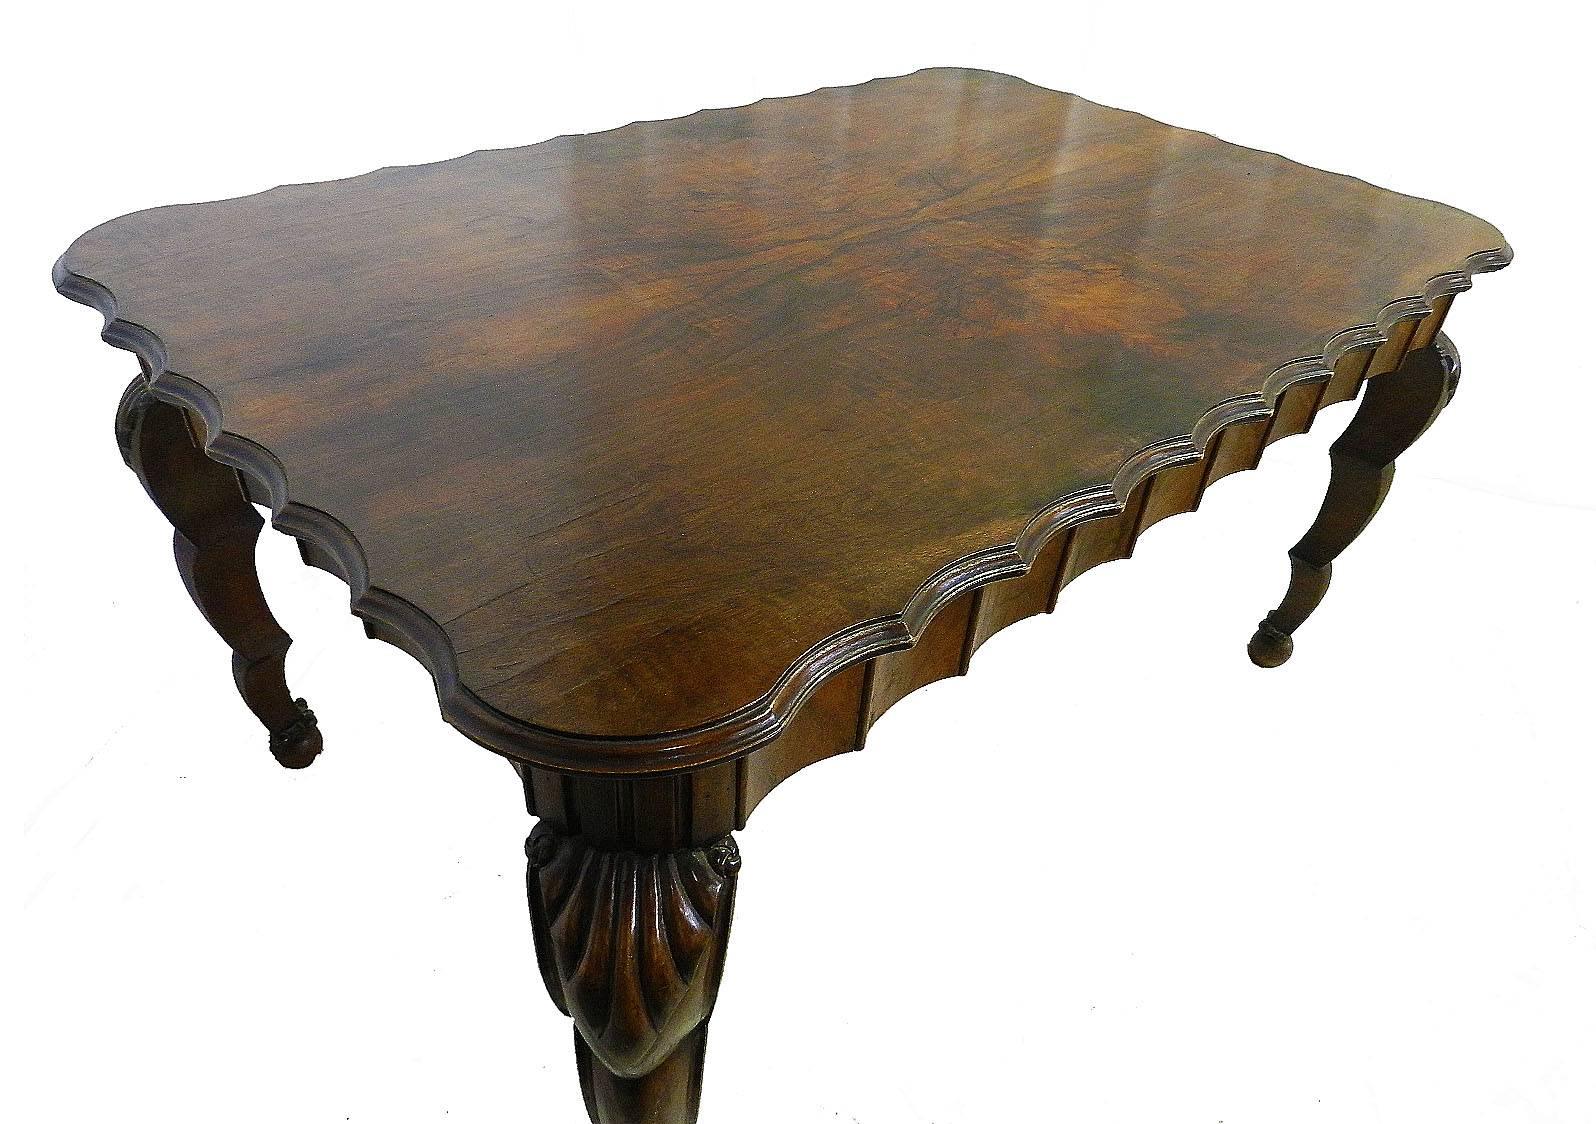 Dining table Art Nouveau Art Deco one of a kind, circa 1910.
Figured burr walnut top
Scalloped edge
Carved dark walnut legs
Italian inspiration from antique grotto shell furniture and reminiscent of early 20th century Hollywood
A very rare find from